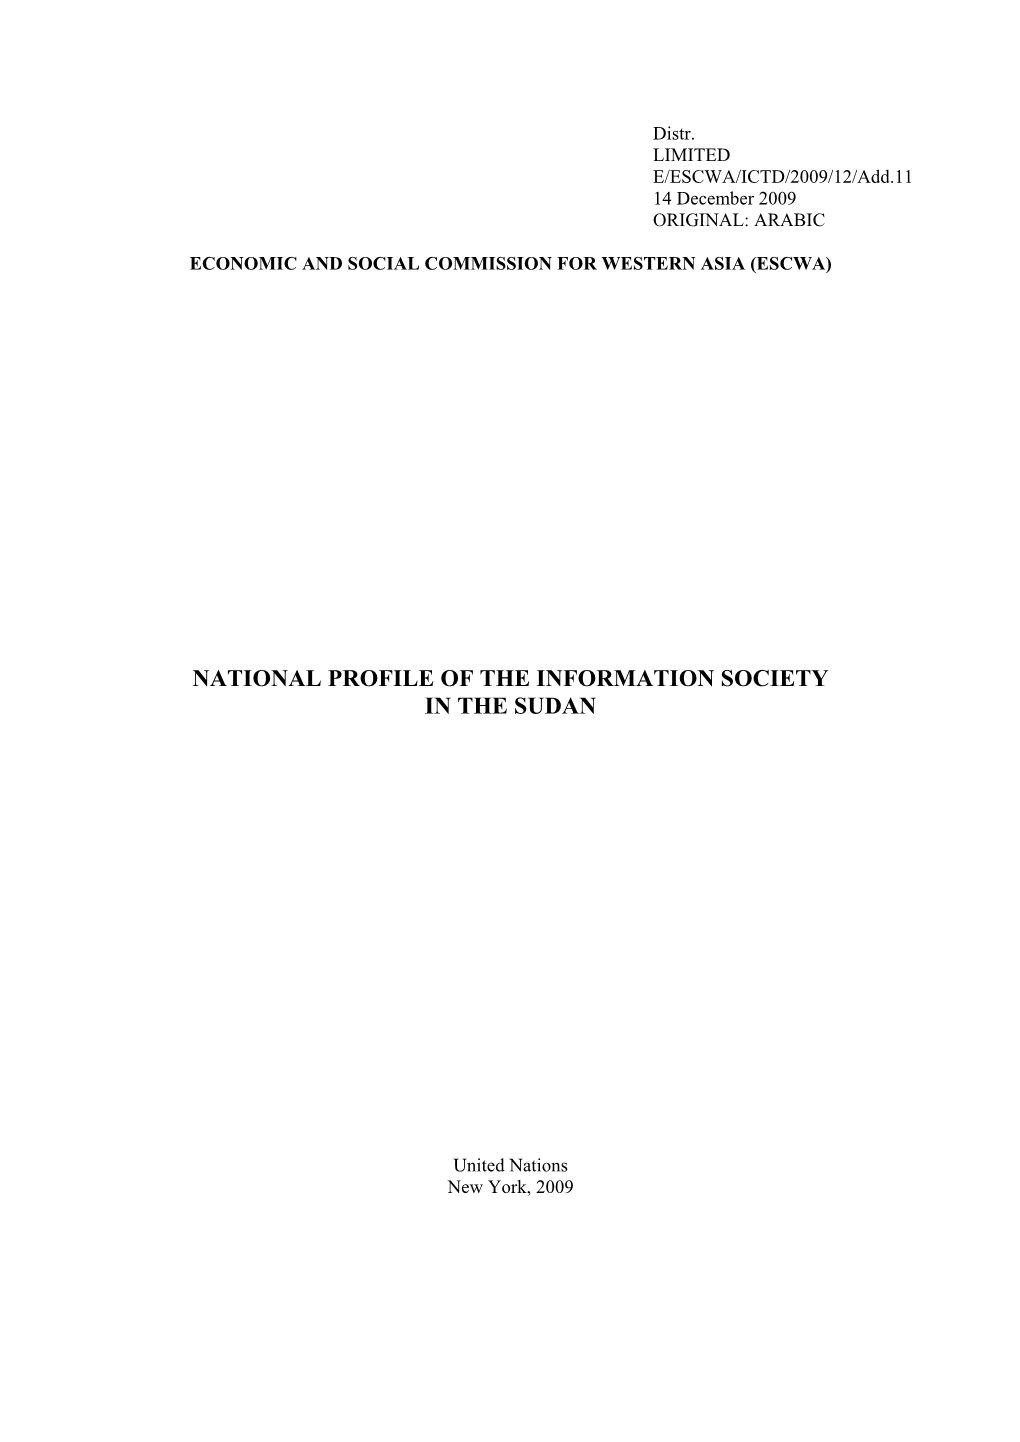 National Profile of the Information Society in the Sudan